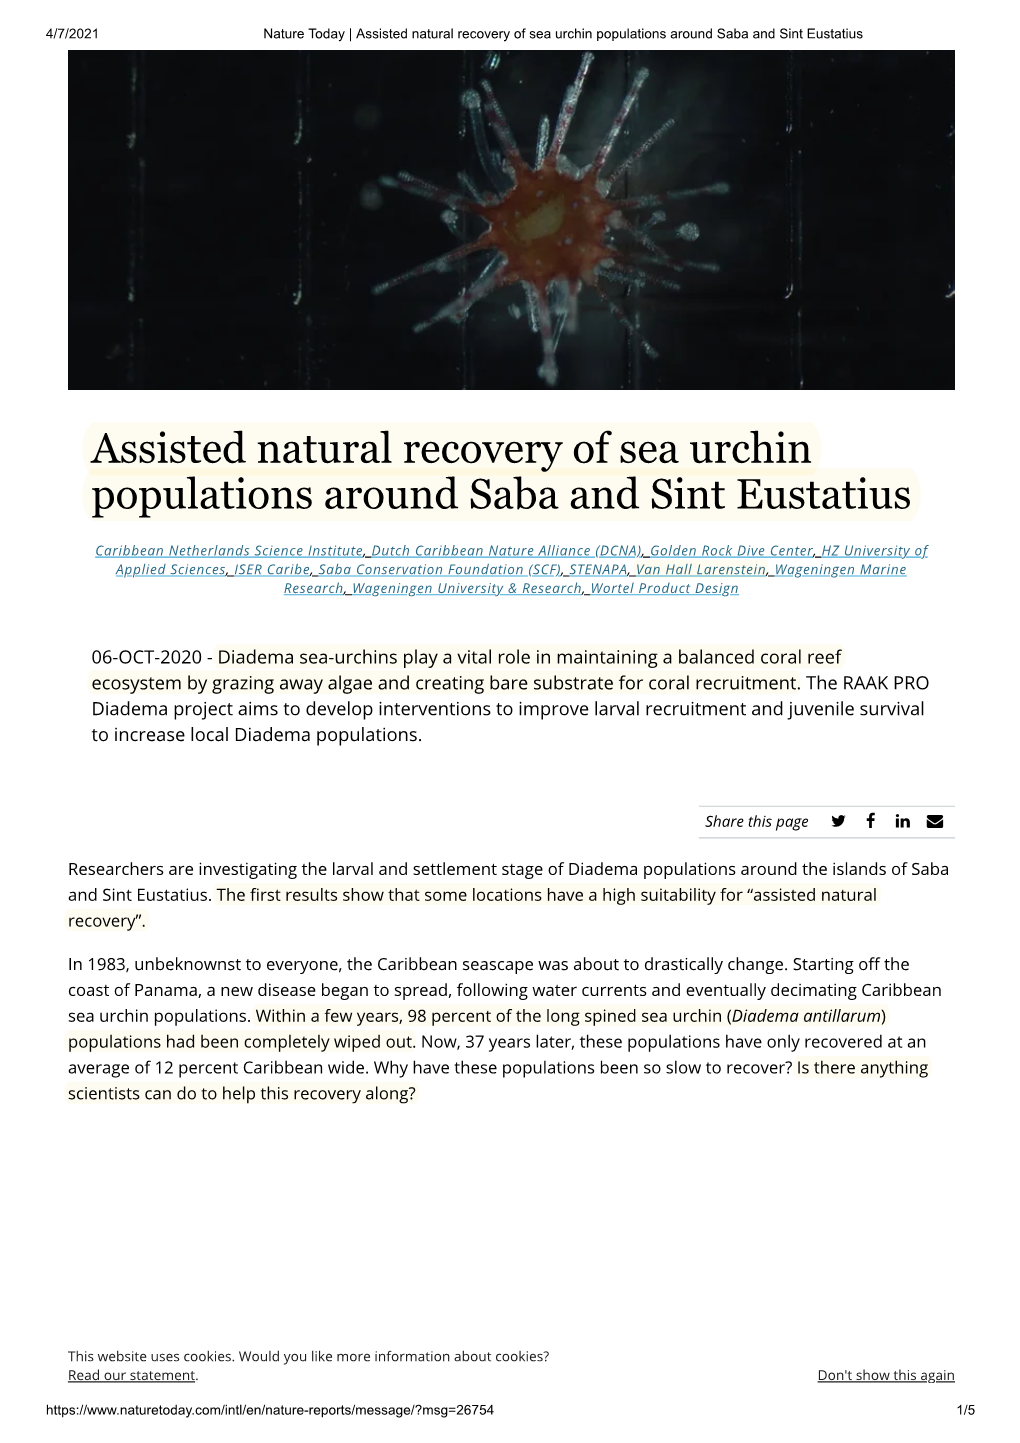 Assisted Natural Recovery of Sea Urchin Populations Around Saba and Sint Eustatius